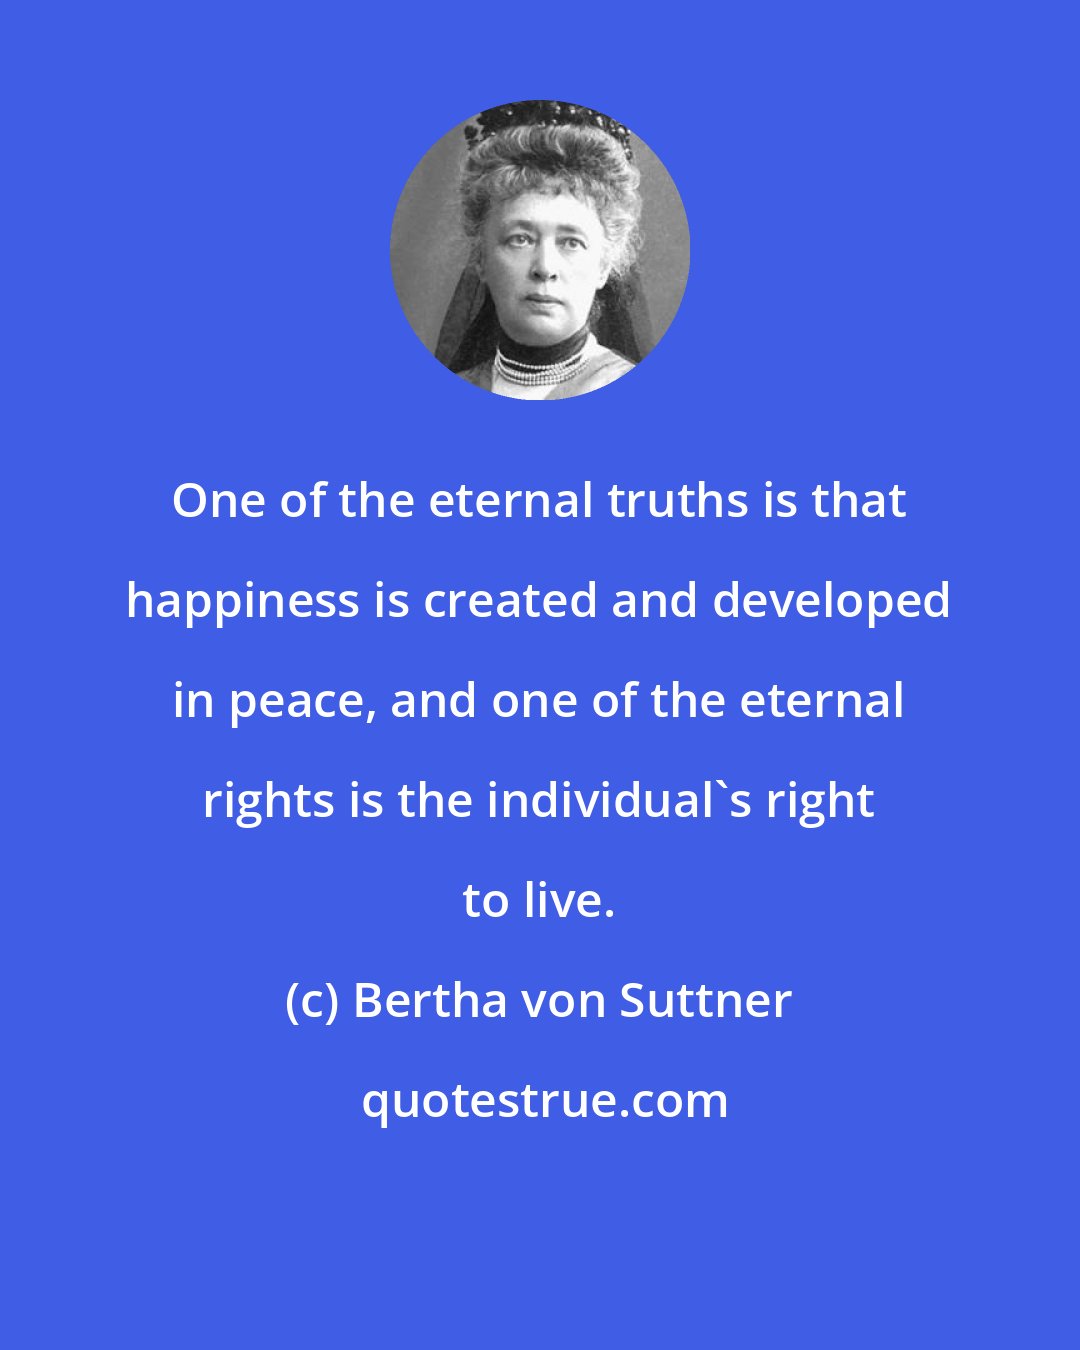 Bertha von Suttner: One of the eternal truths is that happiness is created and developed in peace, and one of the eternal rights is the individual's right to live.